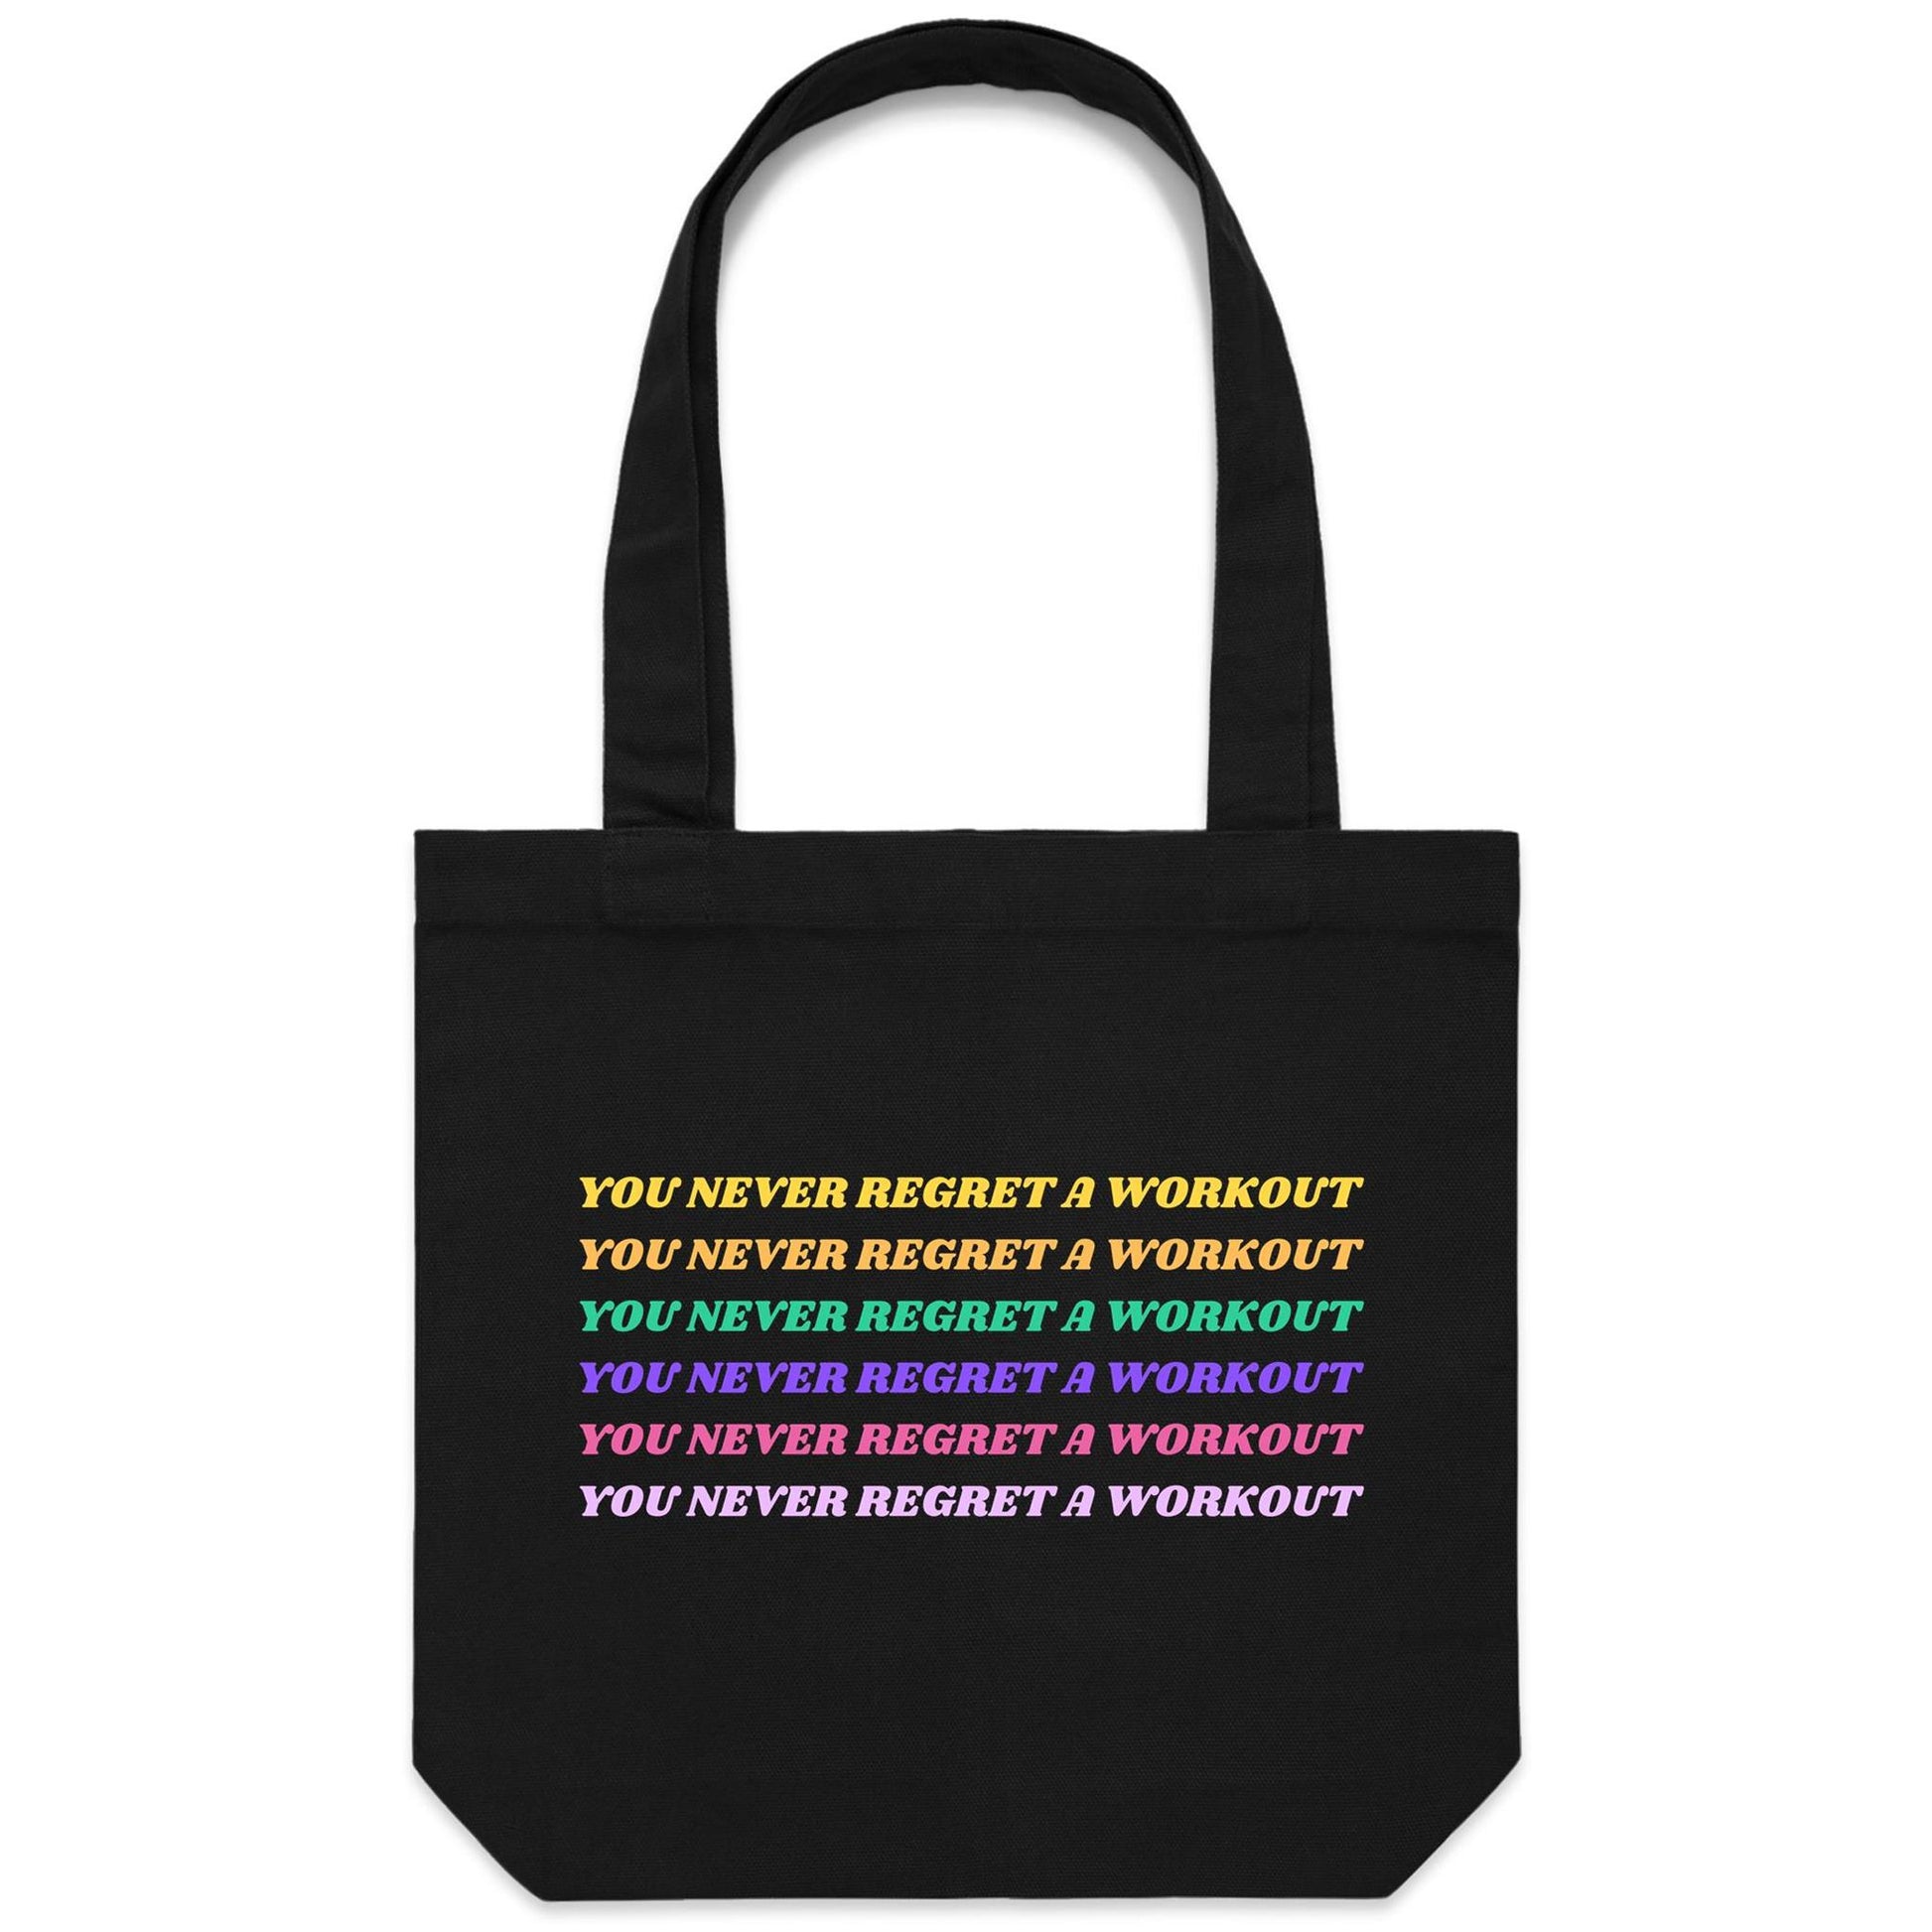 You Never Regret A Workout - Canvas Tote Bag Black One-Size Tote Bag